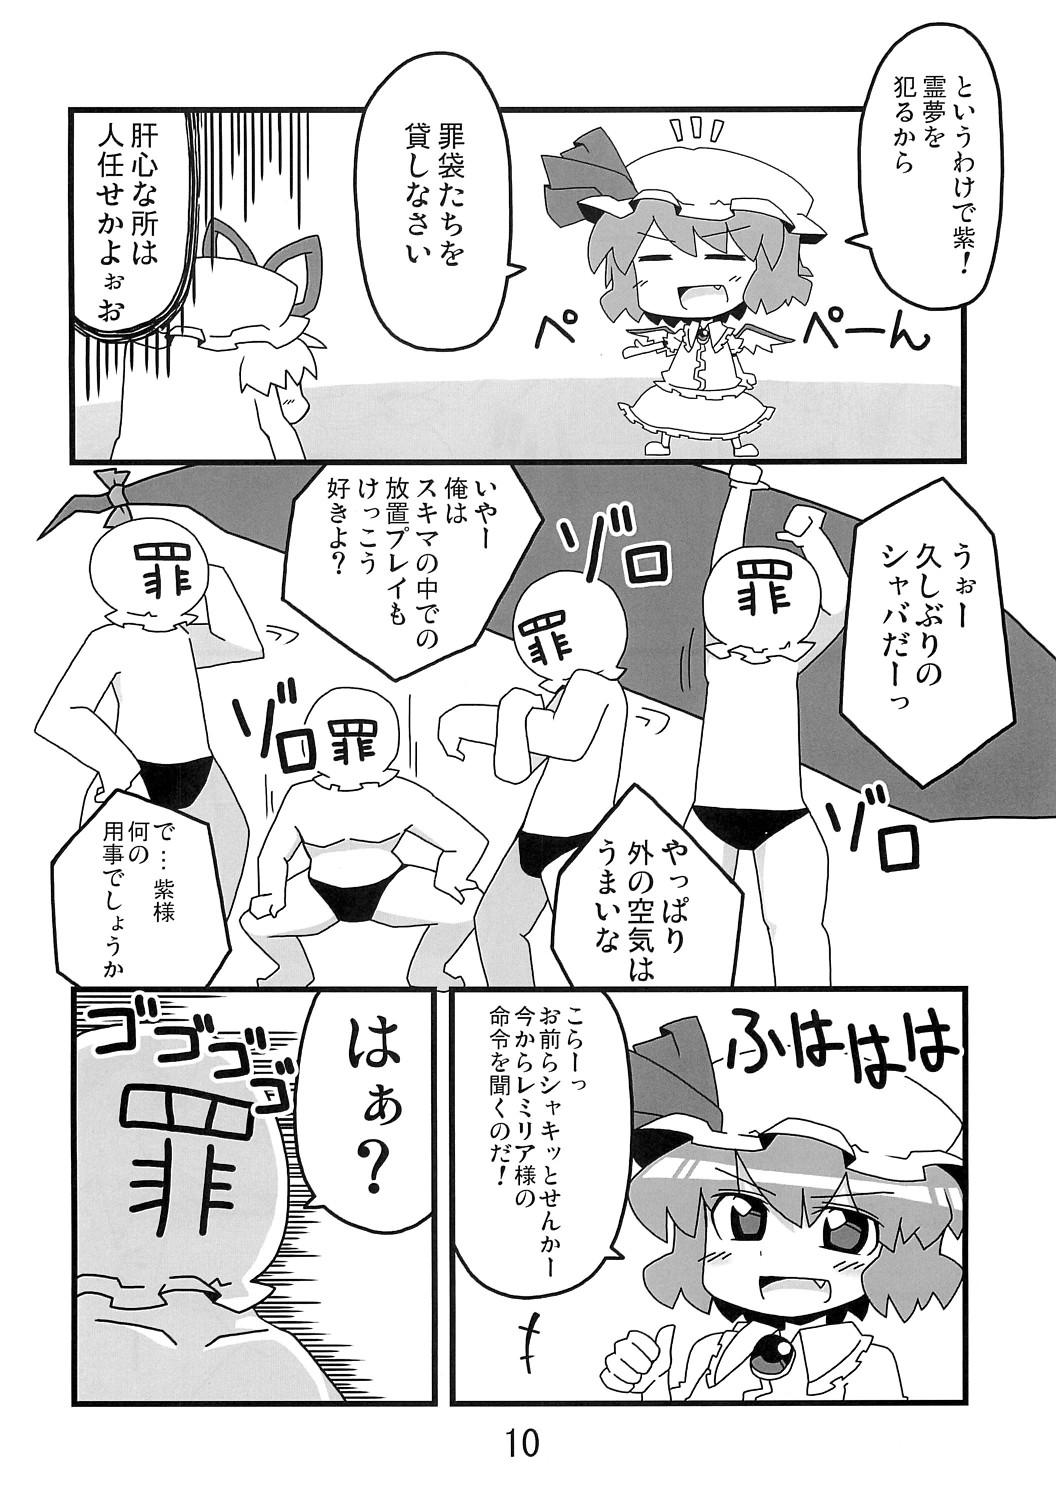 Weird 東方豊年祭 - Touhou project Outdoor Sex - Page 9